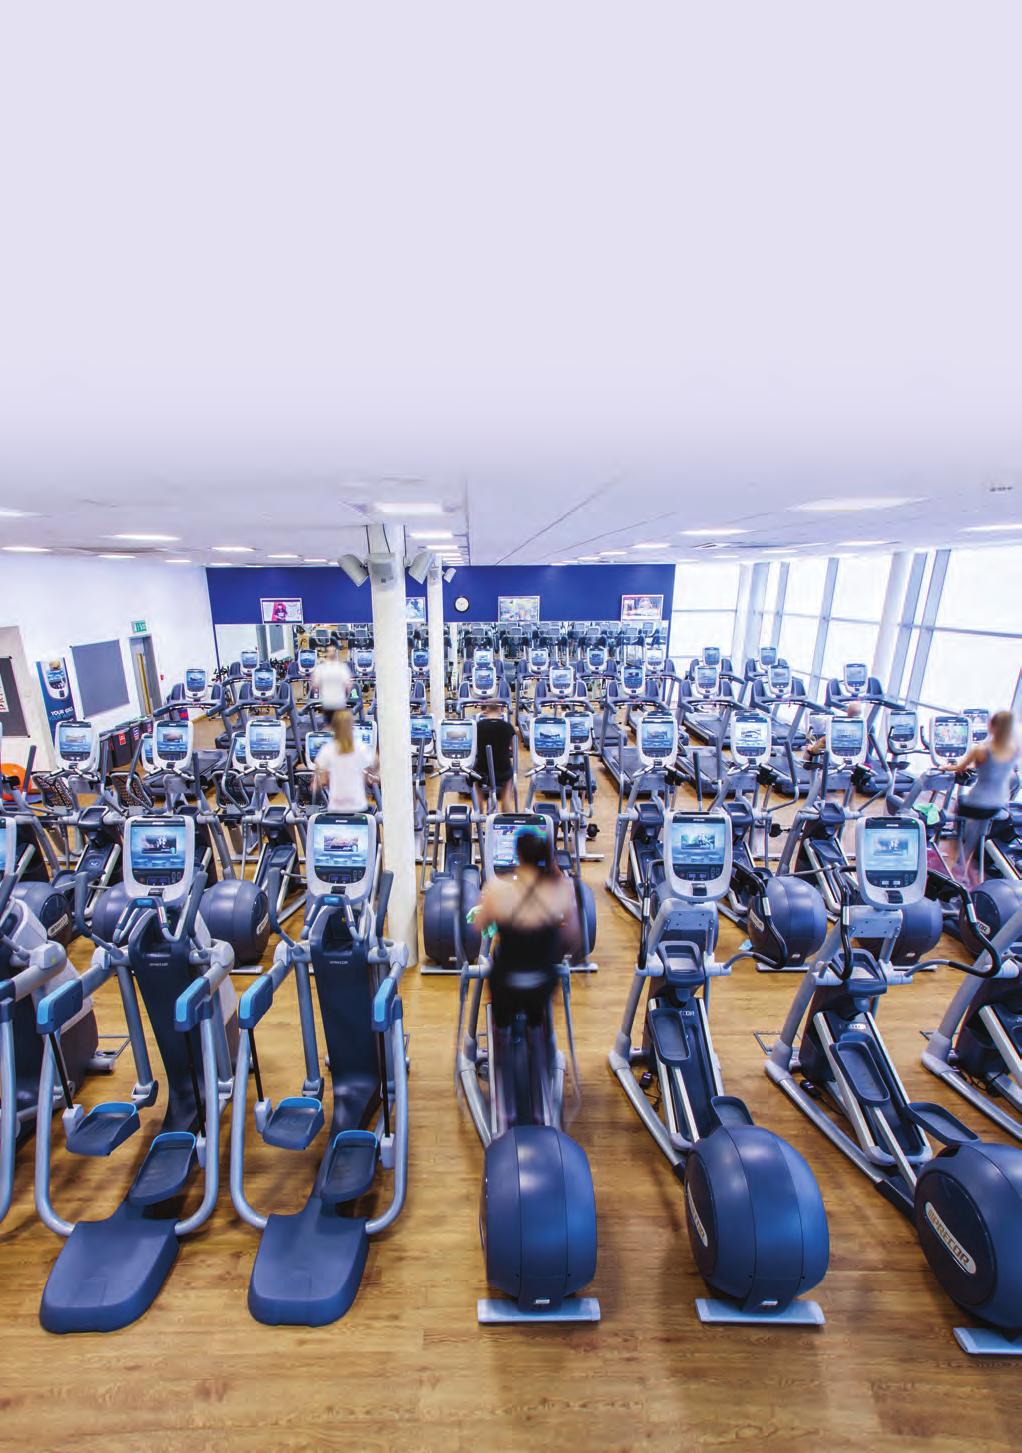 3 3 Facilities From a rewarding workout in our health and fitness suite, to an exercise class with friends in our dedicated studios, our University Sports Centre has outstanding facilities for sport,